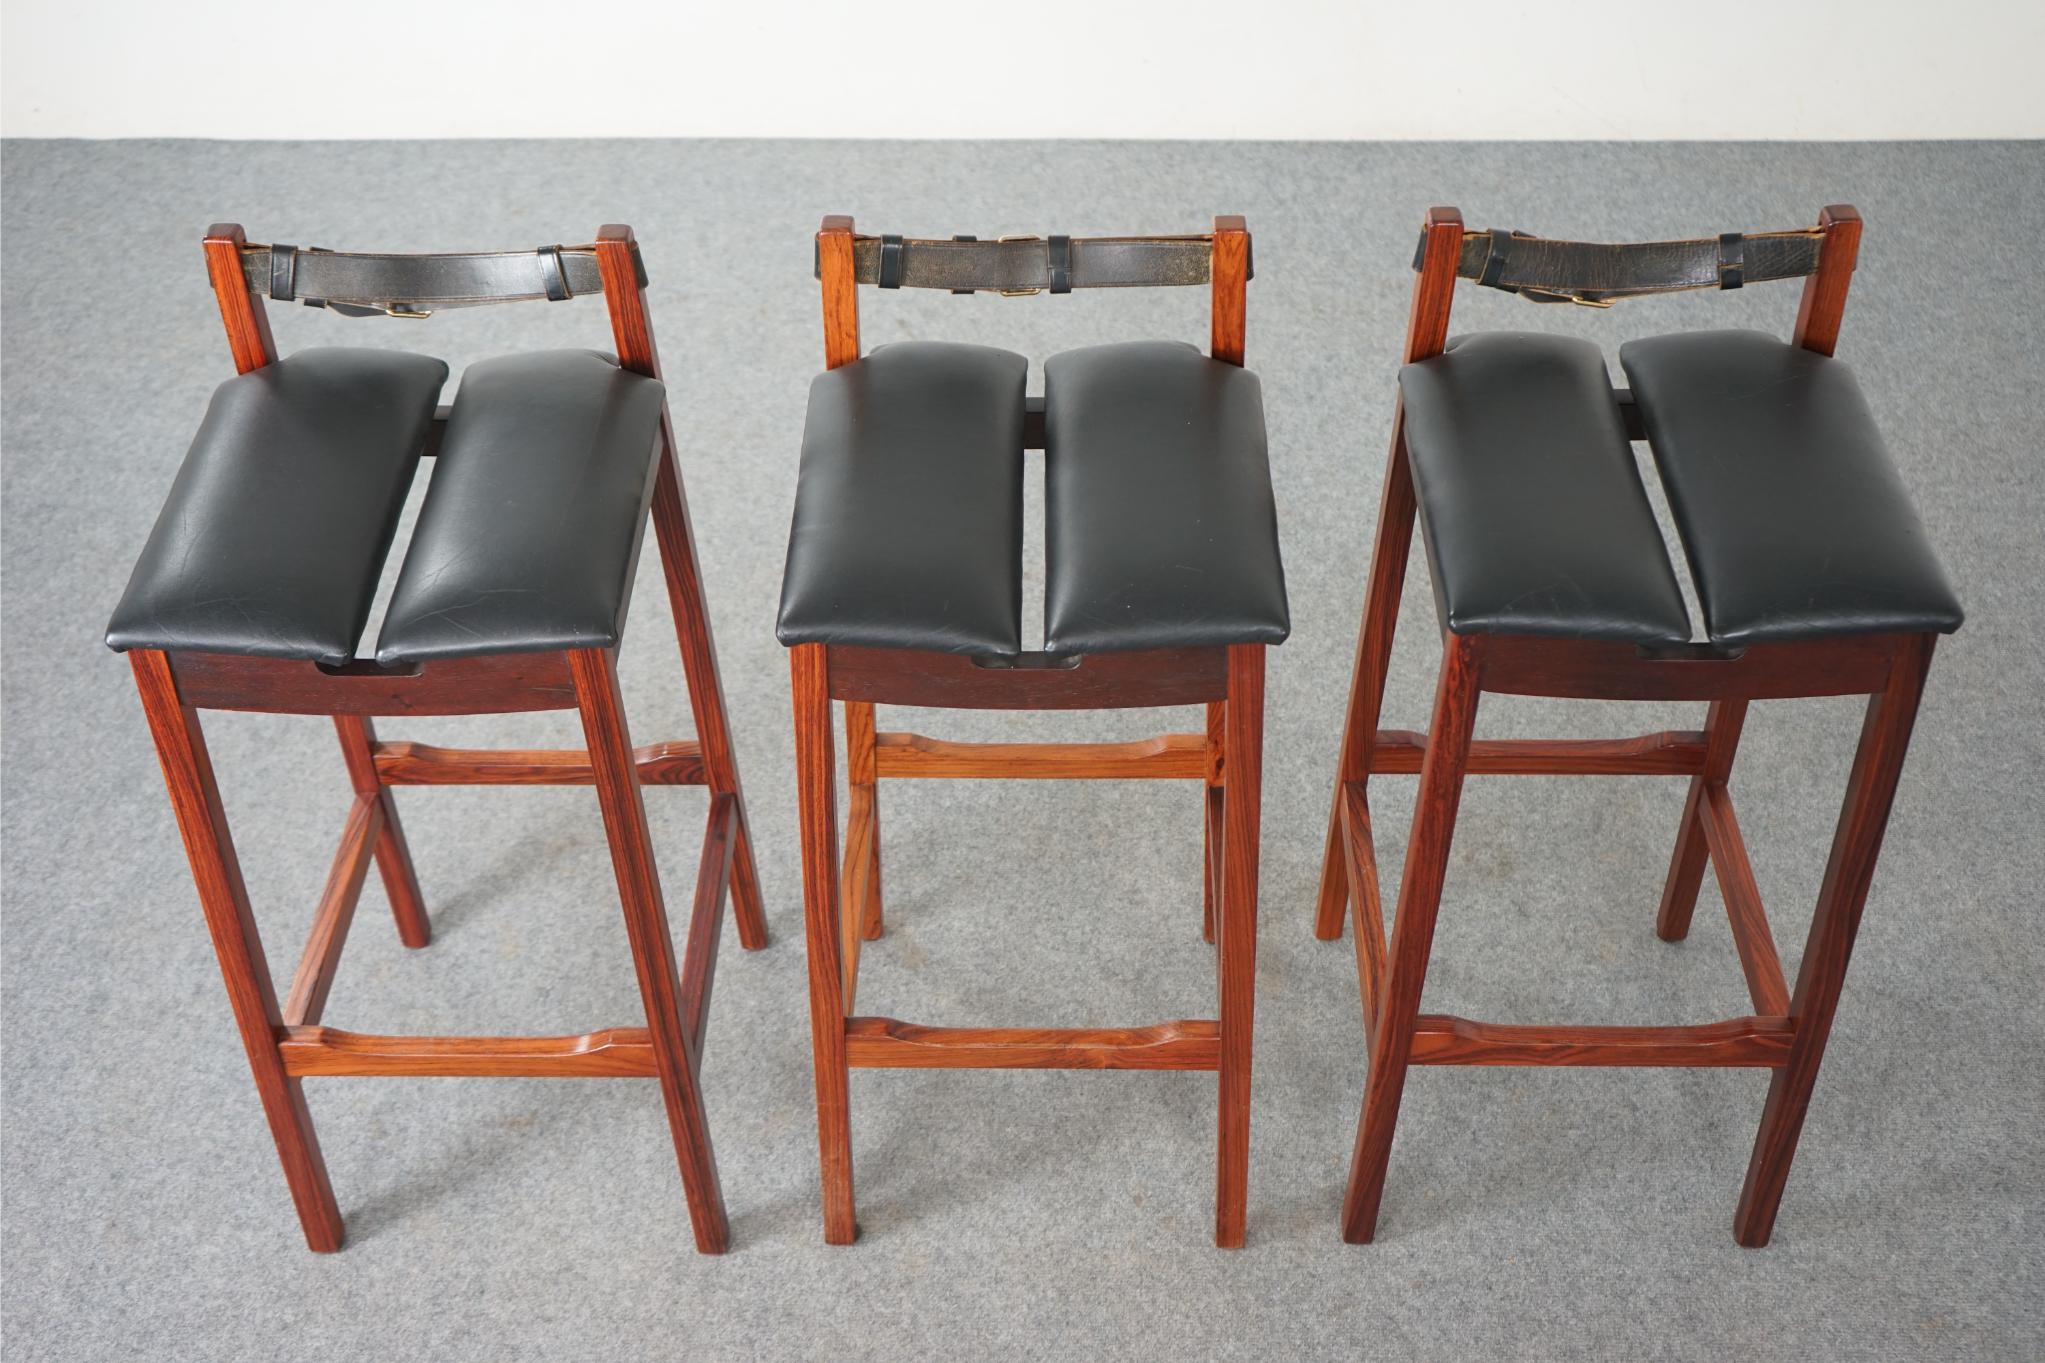 Danish Mid-Century Modern Rosewood Bar with Stools For Sale 4